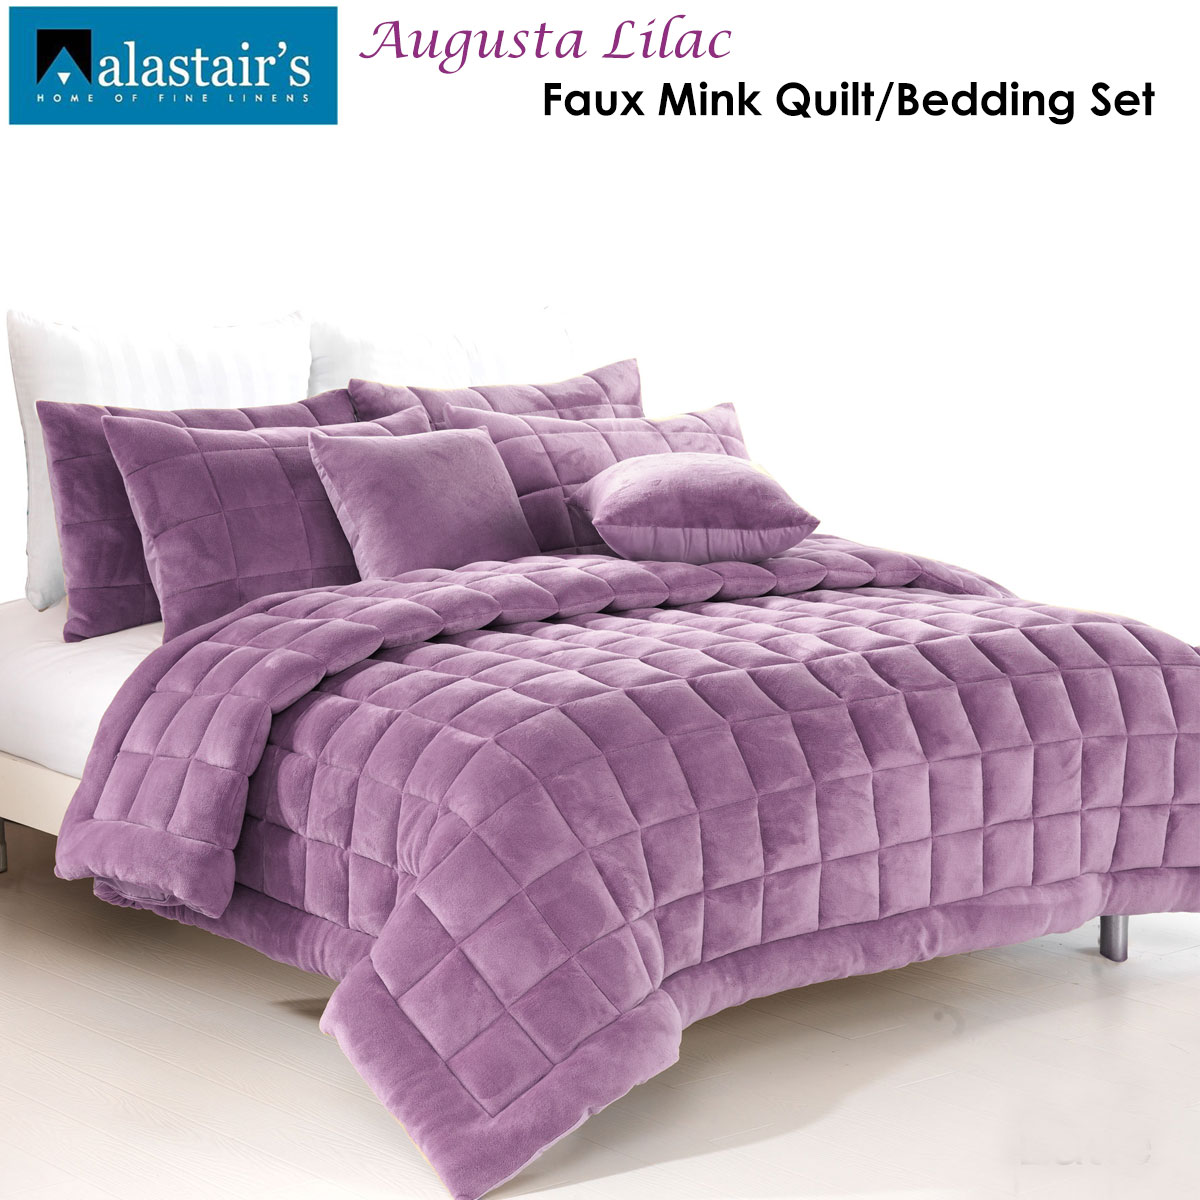 Augusta Lilac Faux Mink Quilt / Comforter Set by Alastairs